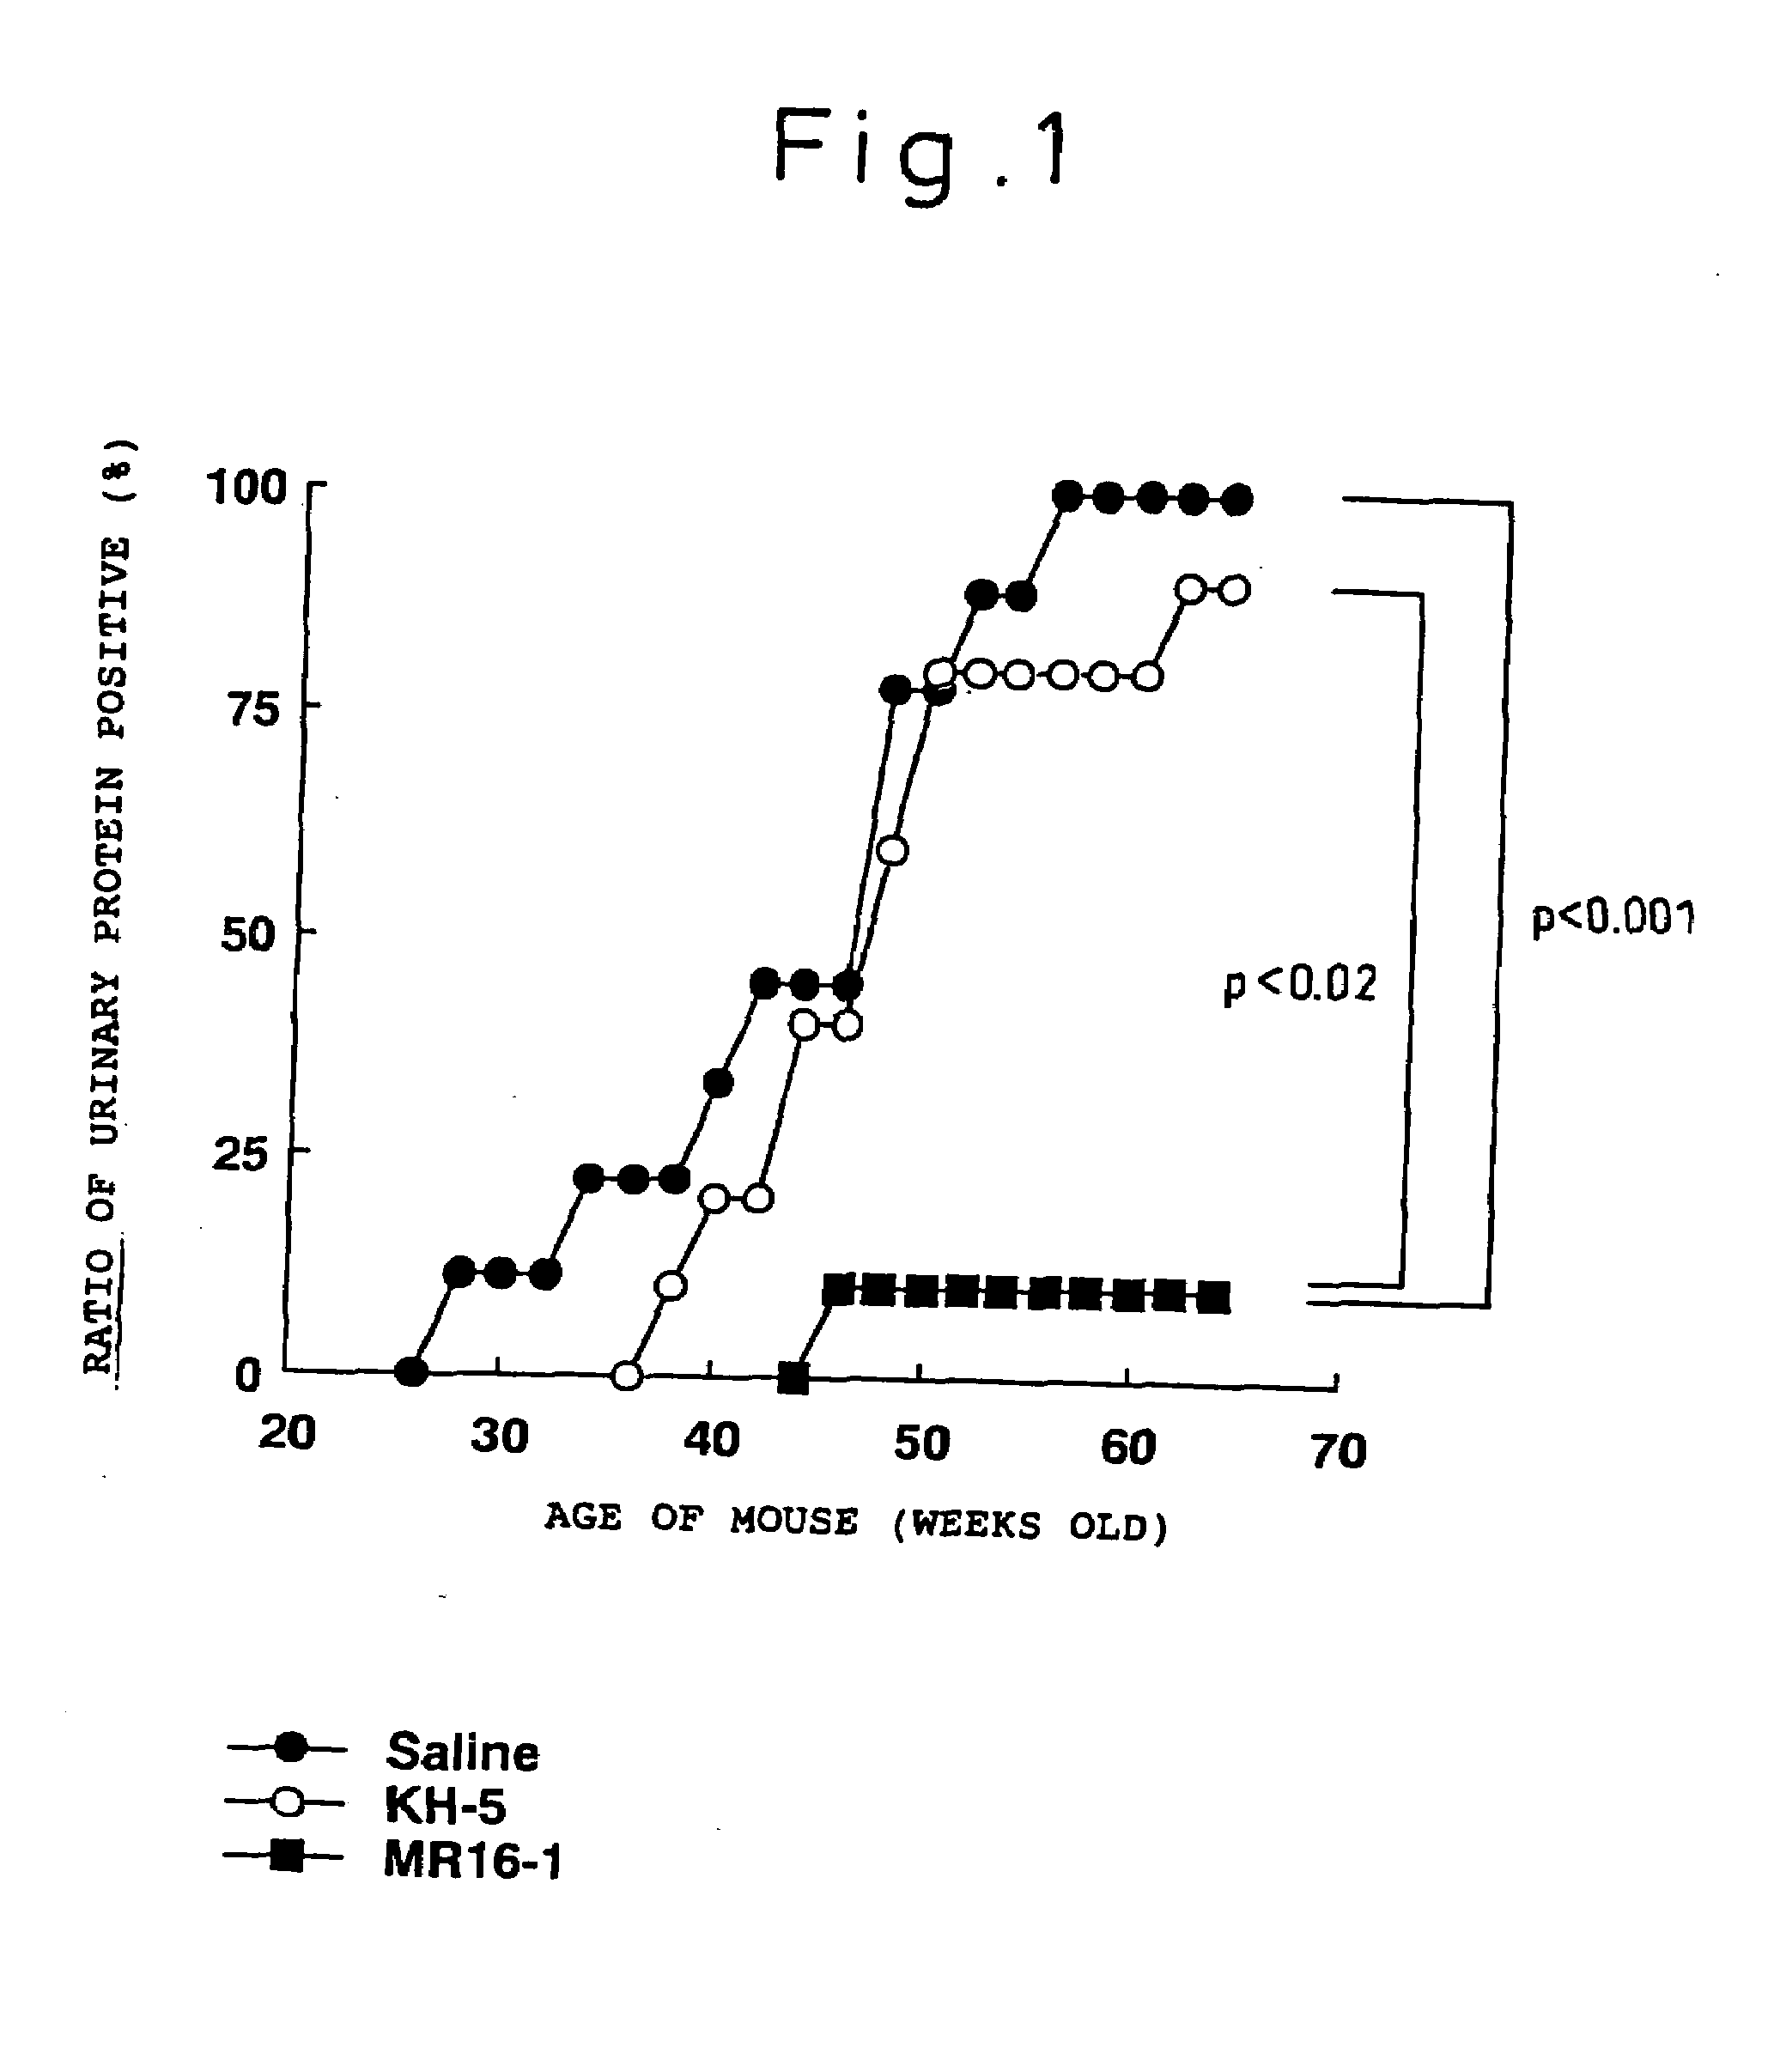 Preventive and/or therapeutic method for systemic lupus erythematosus comprising anti-IL-6 receptor antibody administration